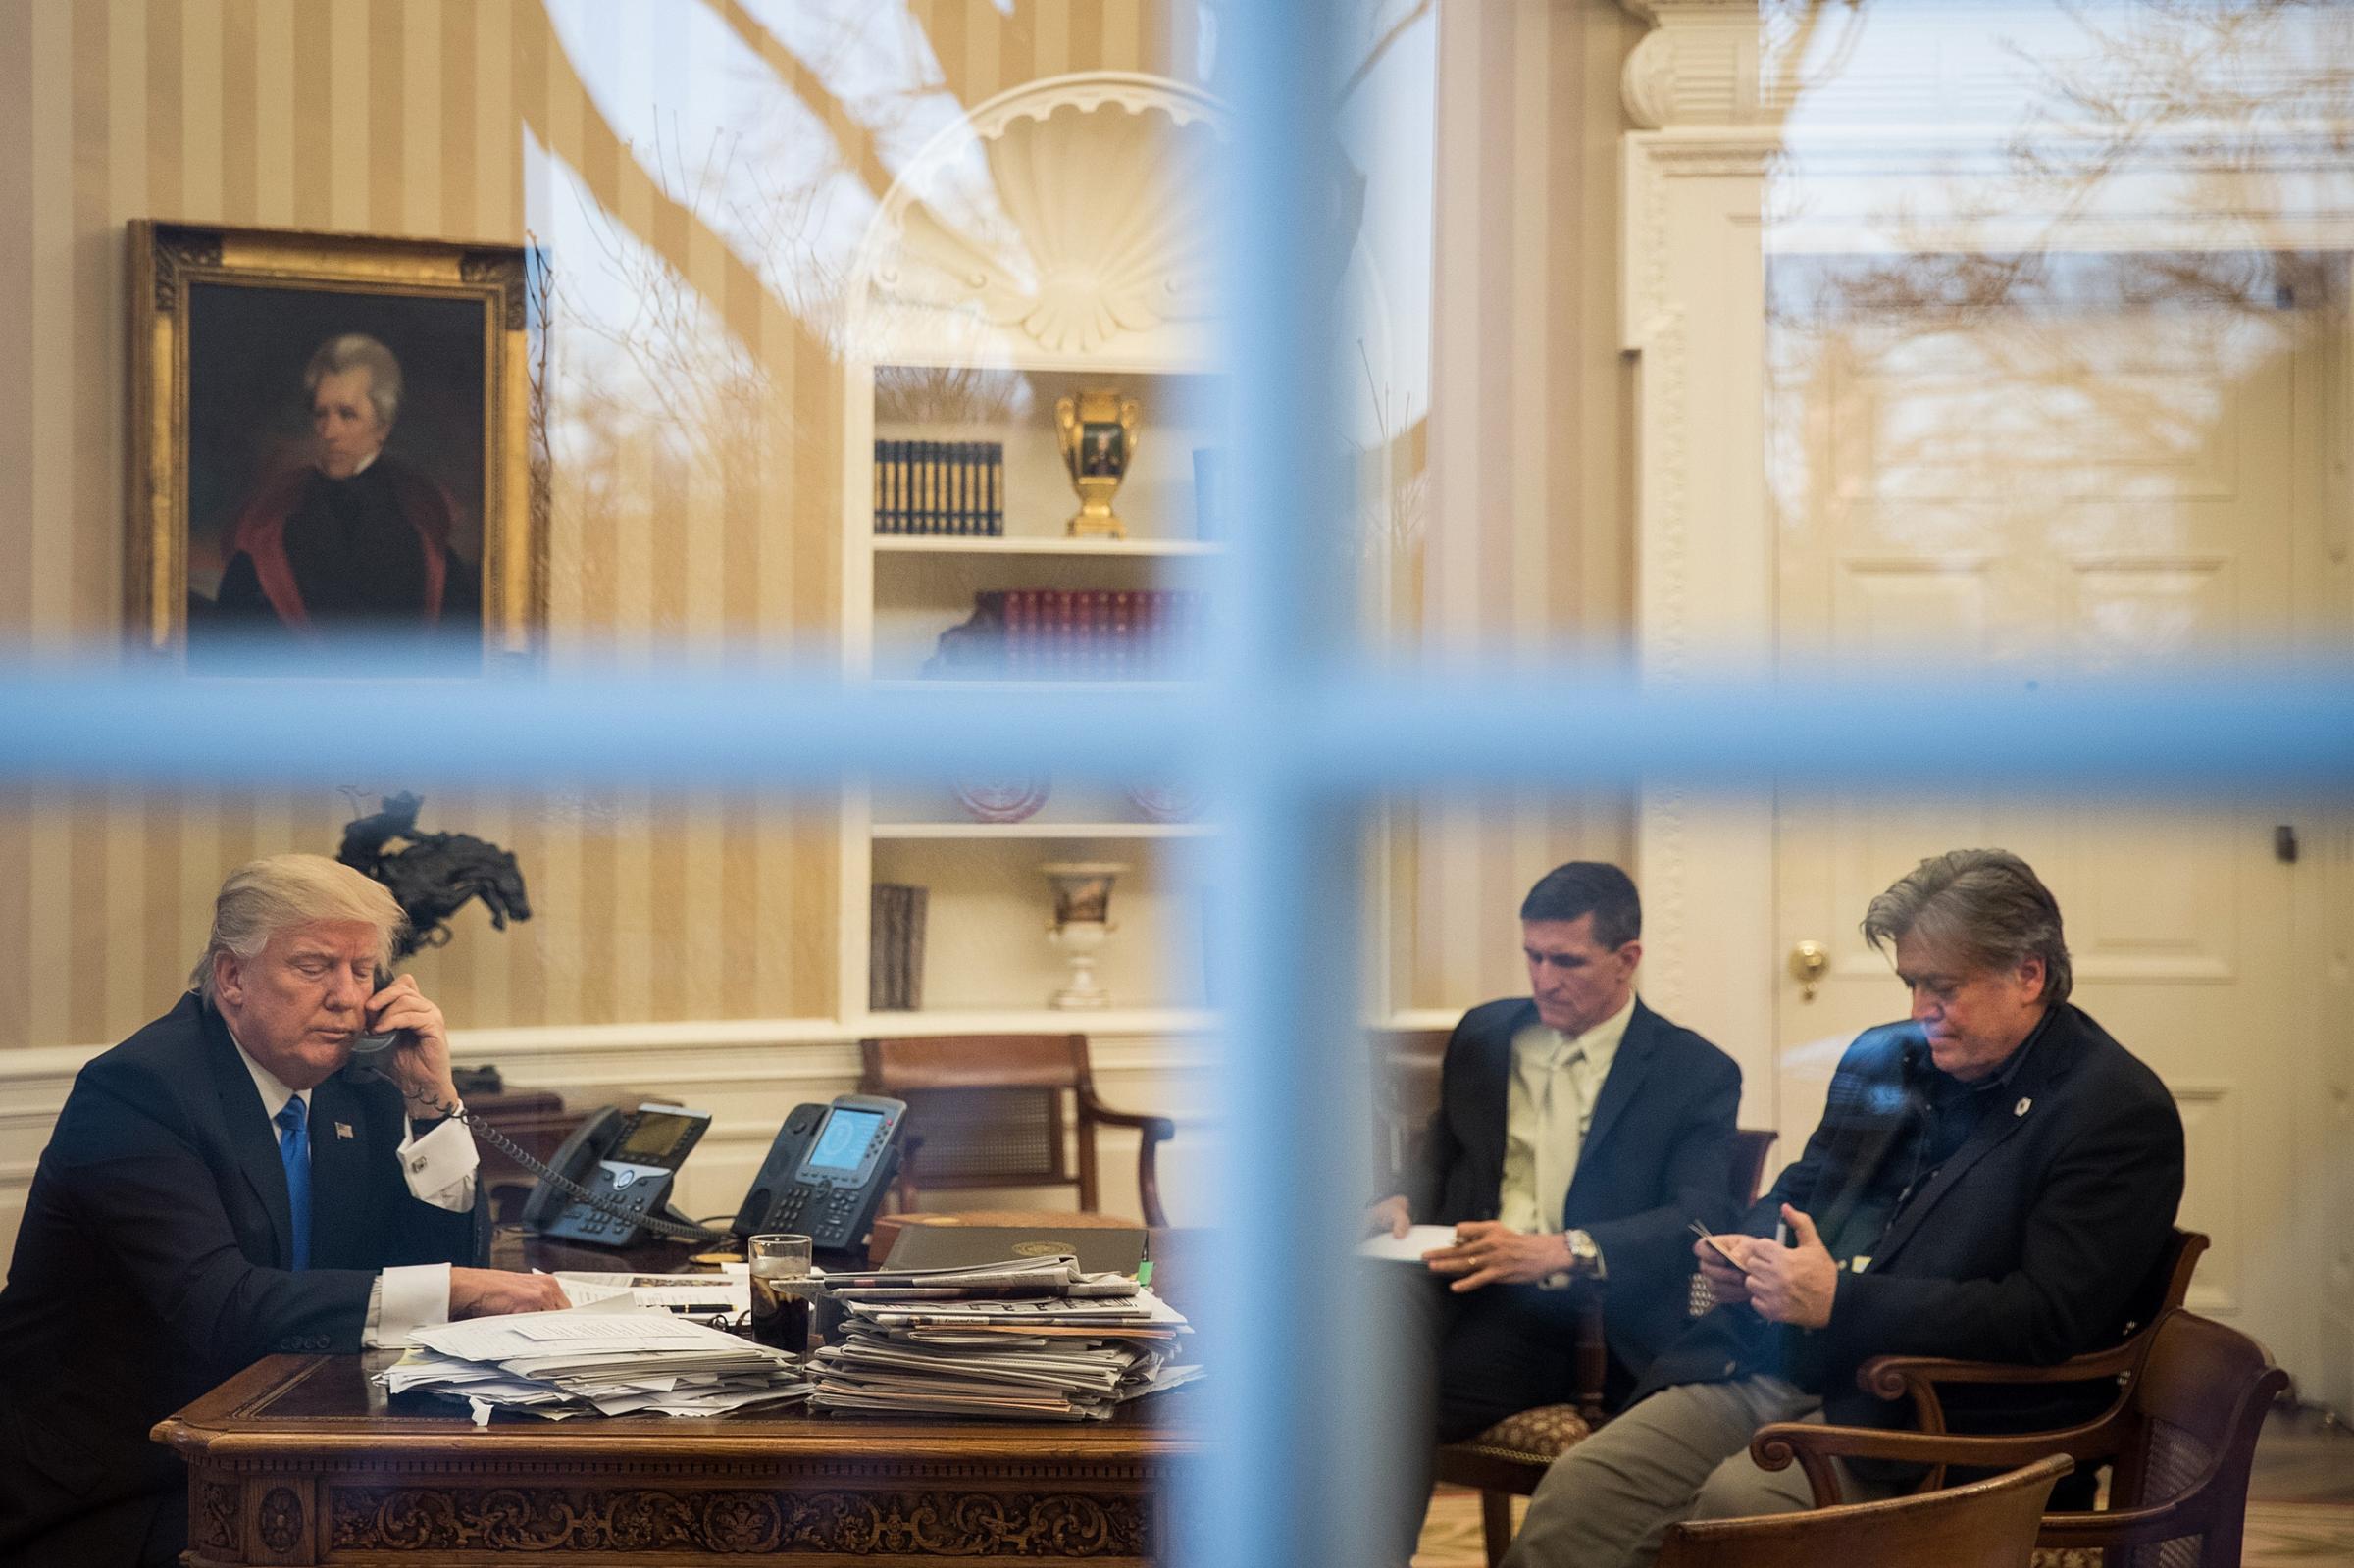 National security advisor Michael Flynn and White House chief strategist Steve Bannon in the Oval Office with President Trump while he speaks on the phone with Australian Prime Minister Malcolm Turnbull , Jan. 28, 2017.